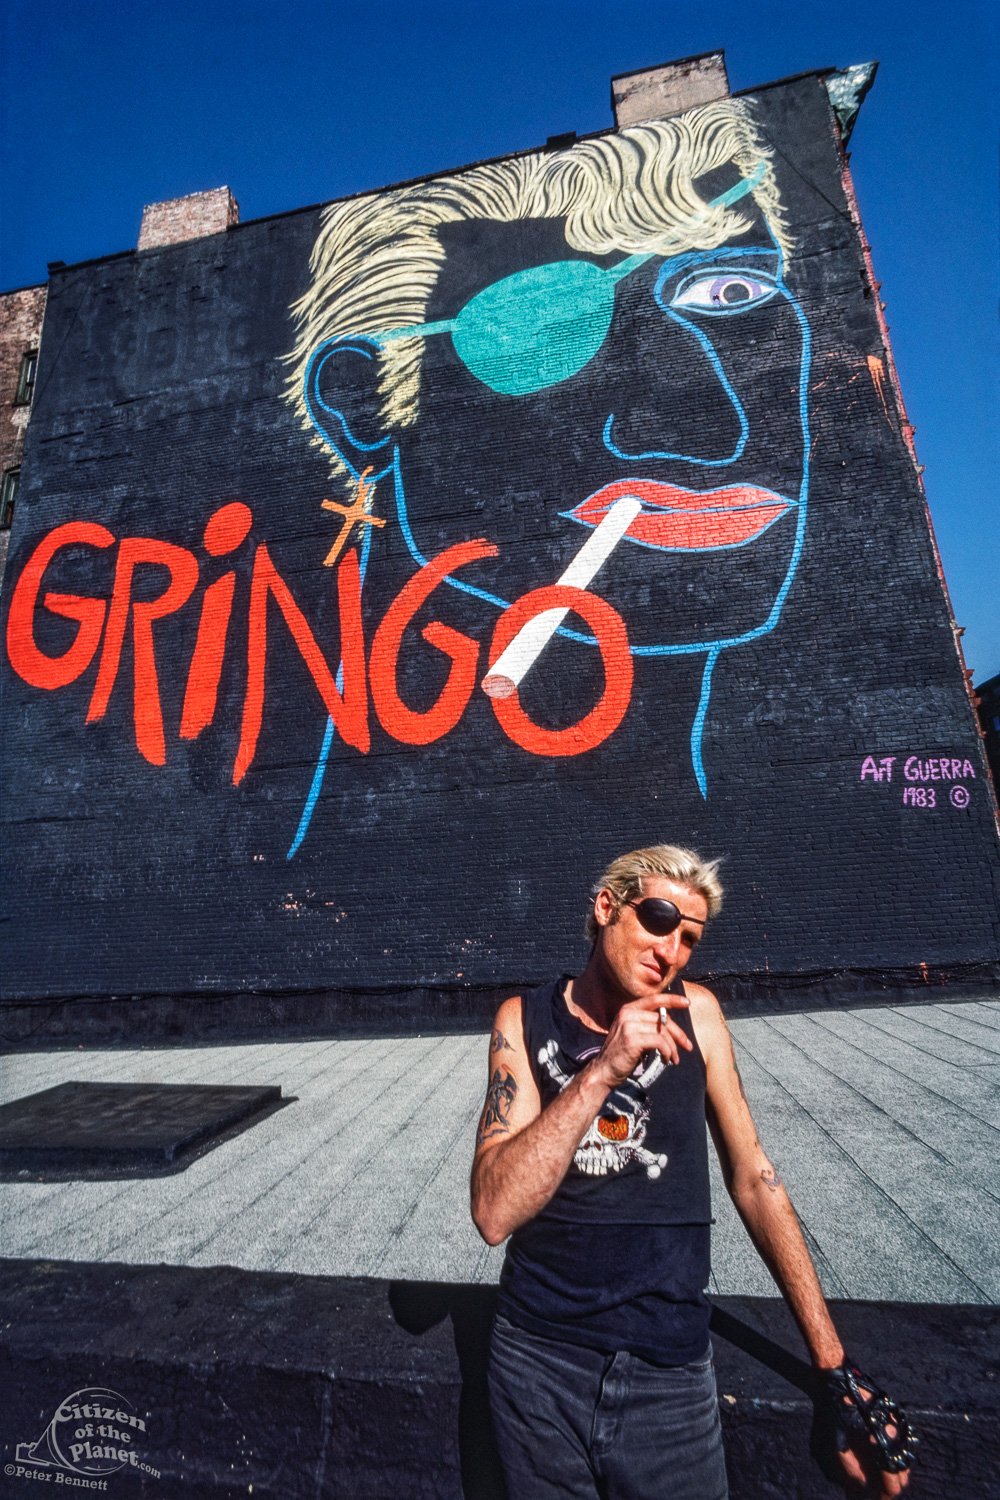 John Spacely in front of Gringo mural by Art Guerra